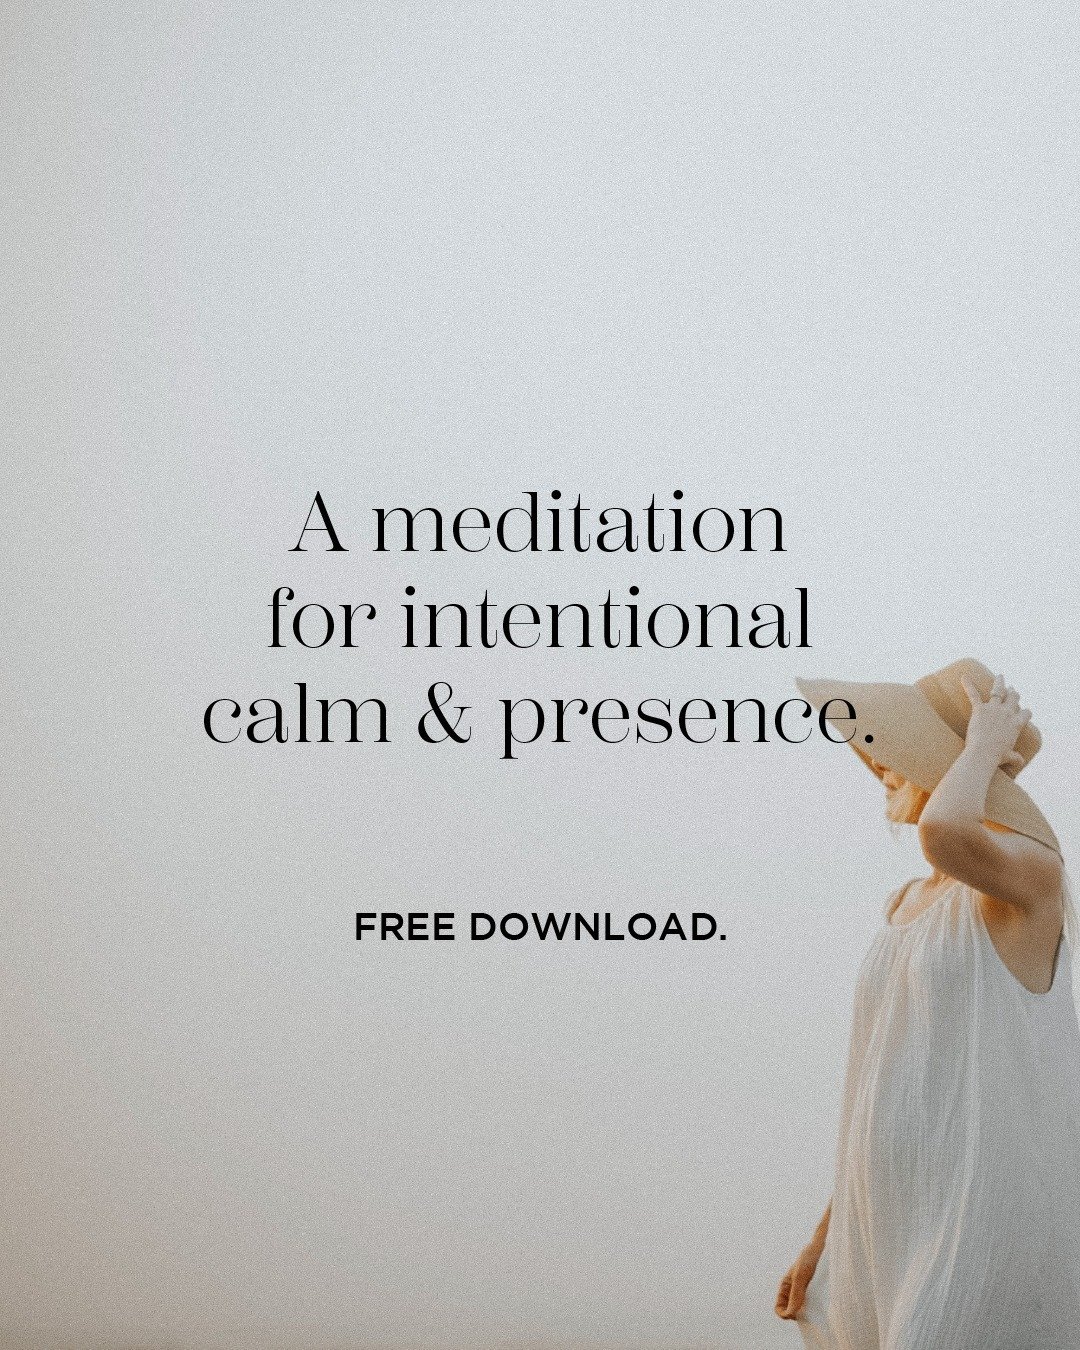 Download our Director of CALM Jerusha Shulberg&rsquo;s grounding, awakening 10-minute meditation. ⁠Rest and refresh mind and body in a few quiet, calm, intentionally spent minutes.⁠
⁠
DM us if you'd like to know more about CALM and Jerusha's meditati